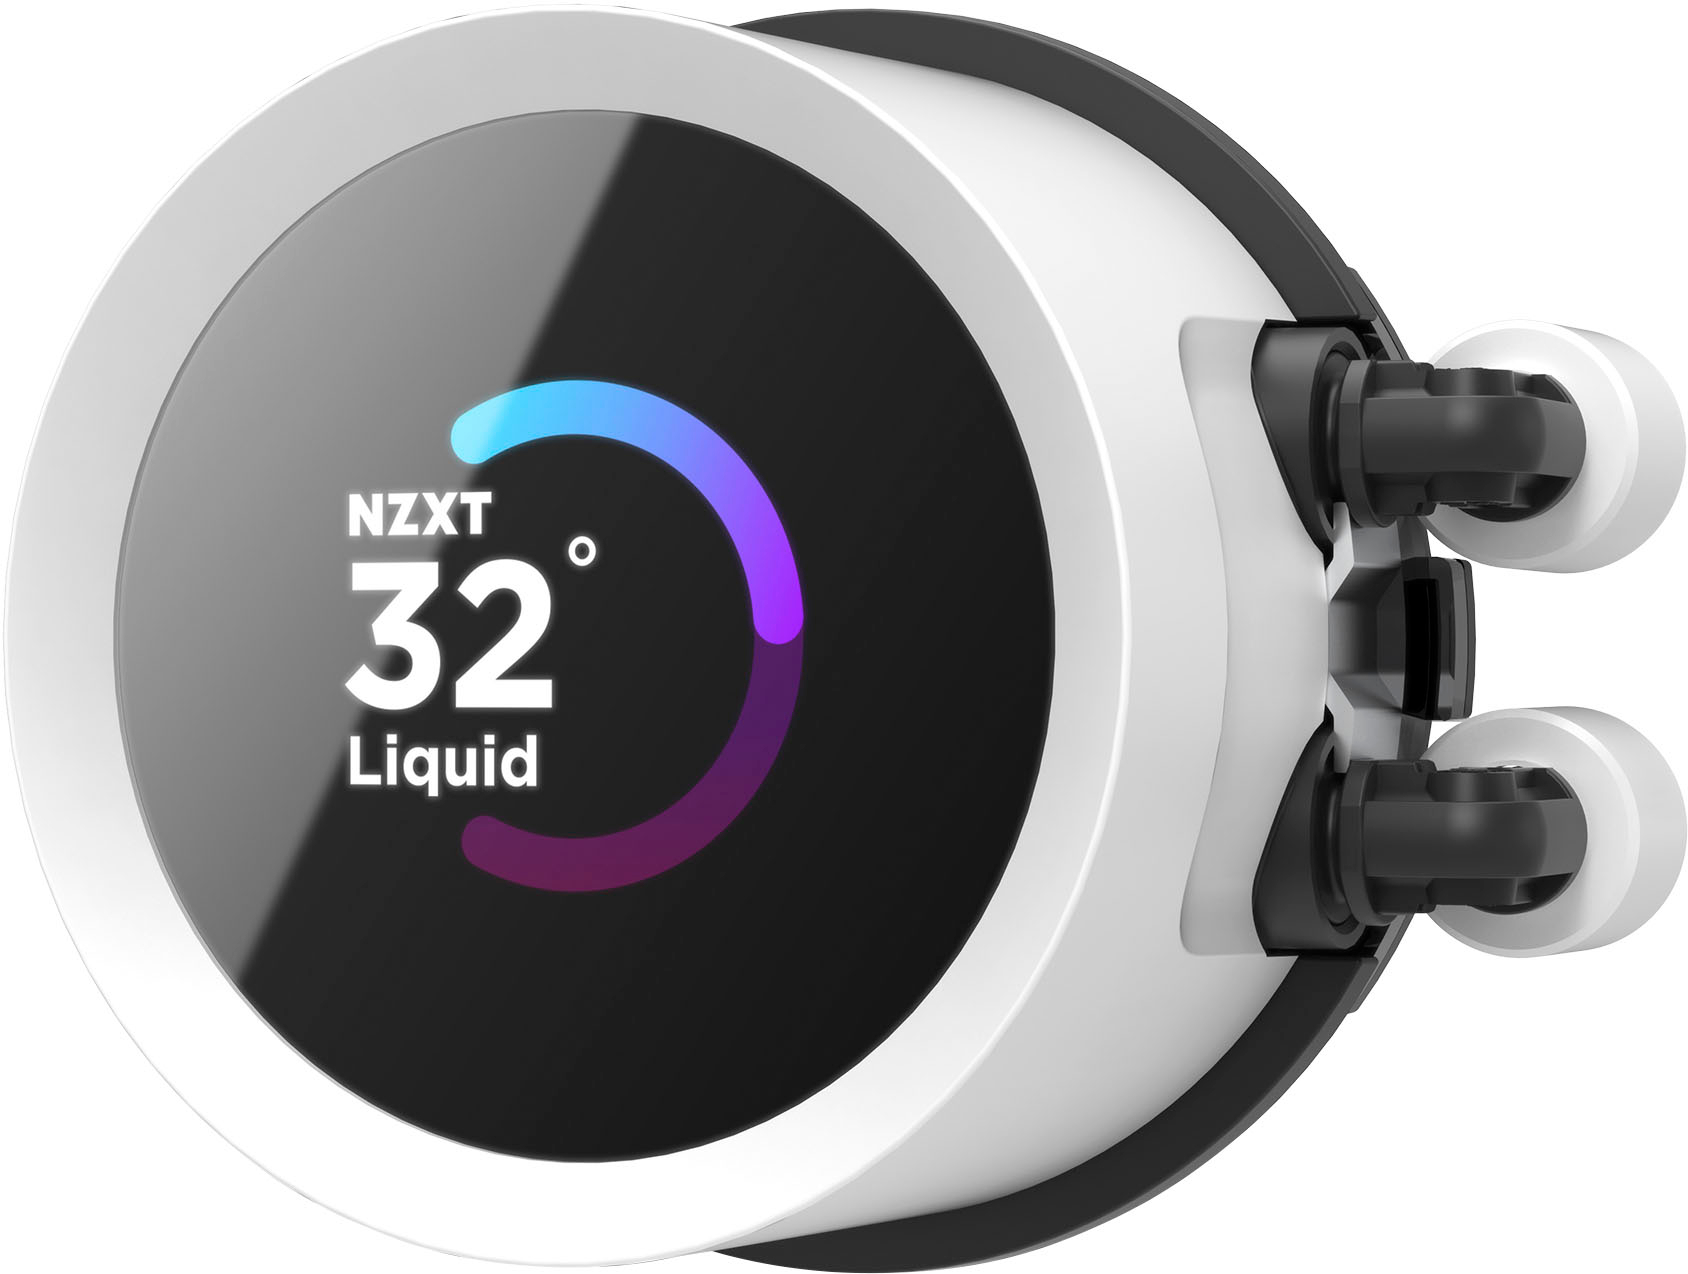 Fans and 240mm display Radiator Best RGB LCD AIO + RL-KR240-W1 240 Cooling Fans Liquid - Kraken NZXT White with Buy 1.54\